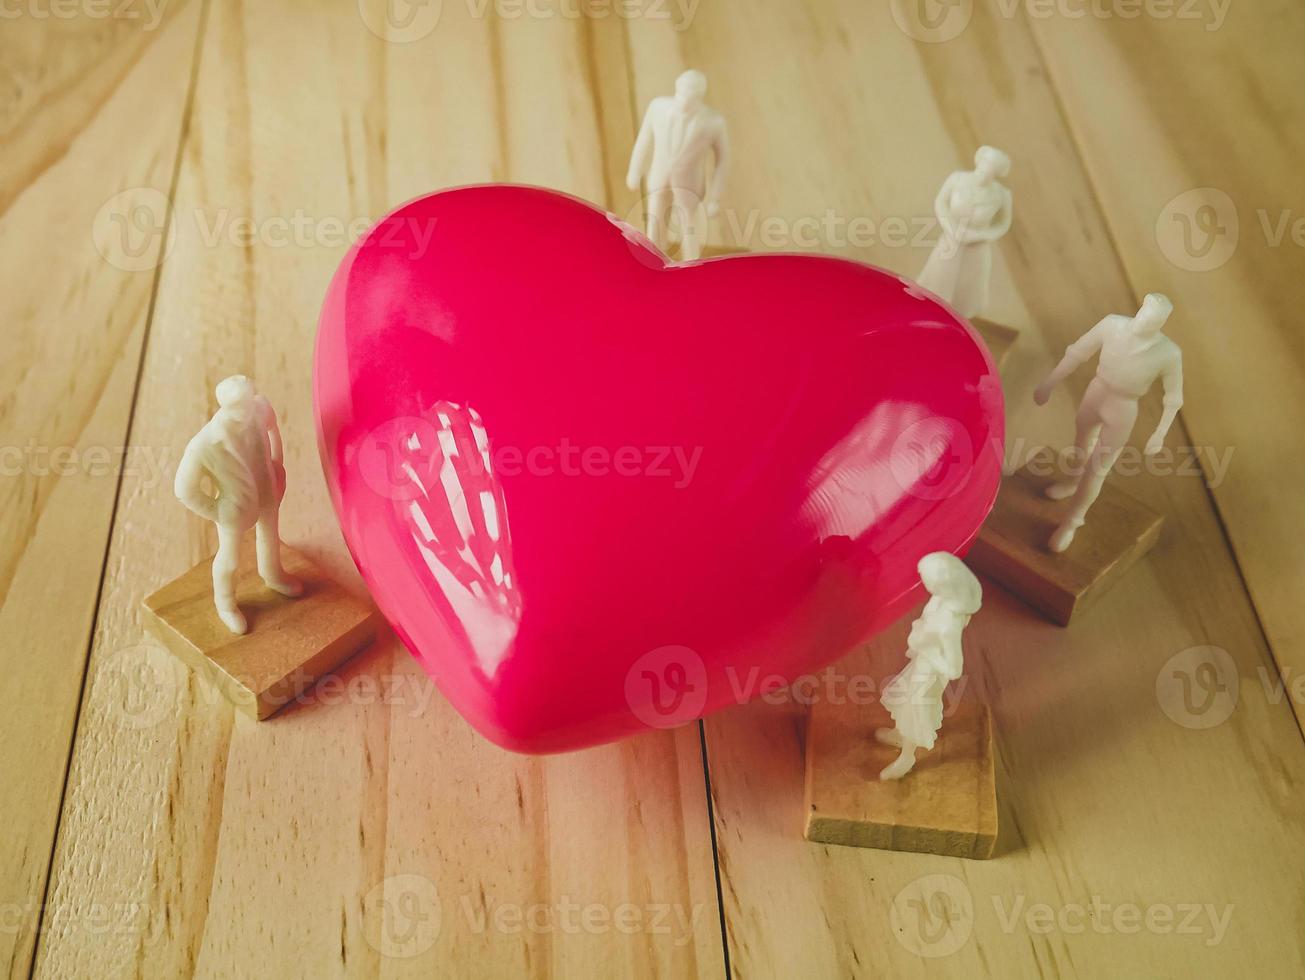 pink heart and white figure on wood table for Health, medical content. photo